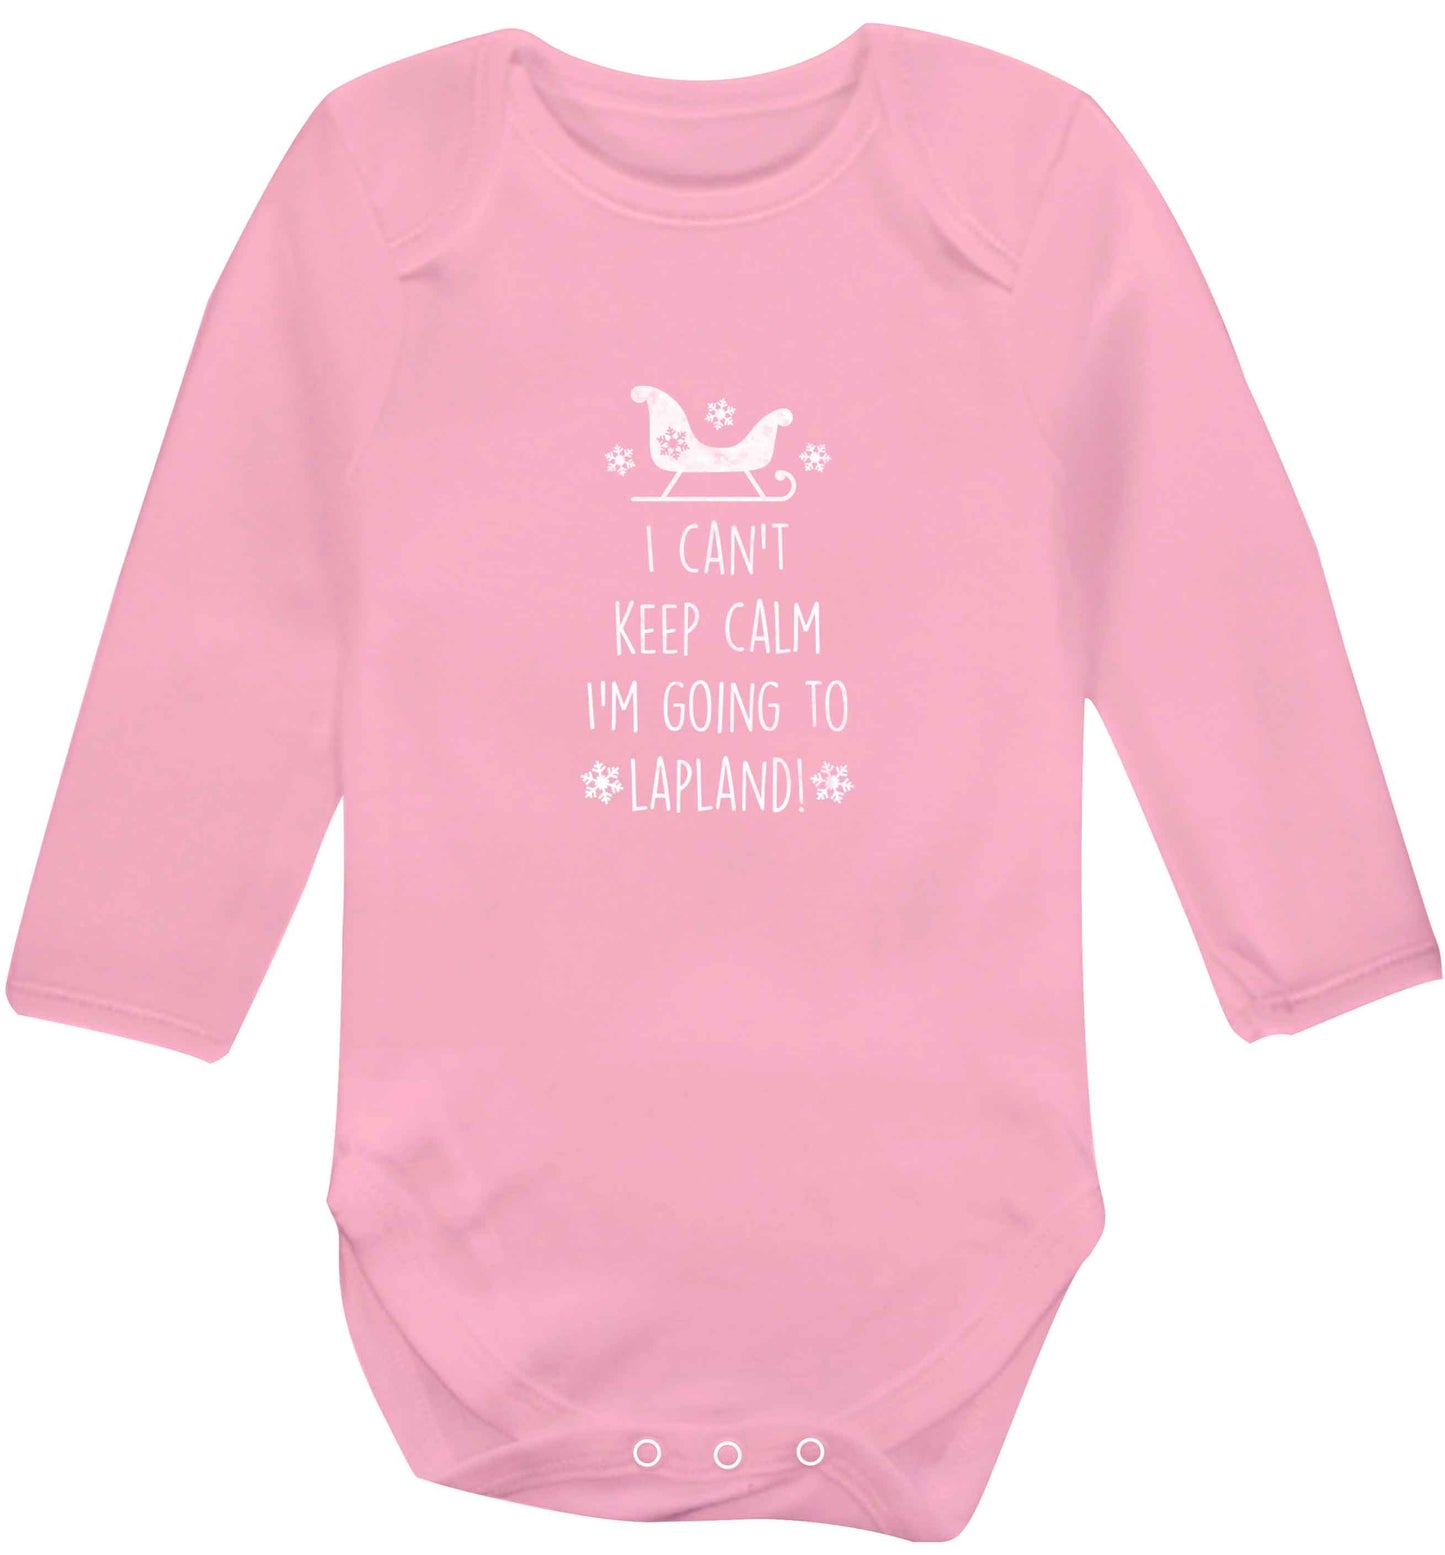 I can't keep calm I'm going to Lapland baby vest long sleeved pale pink 6-12 months